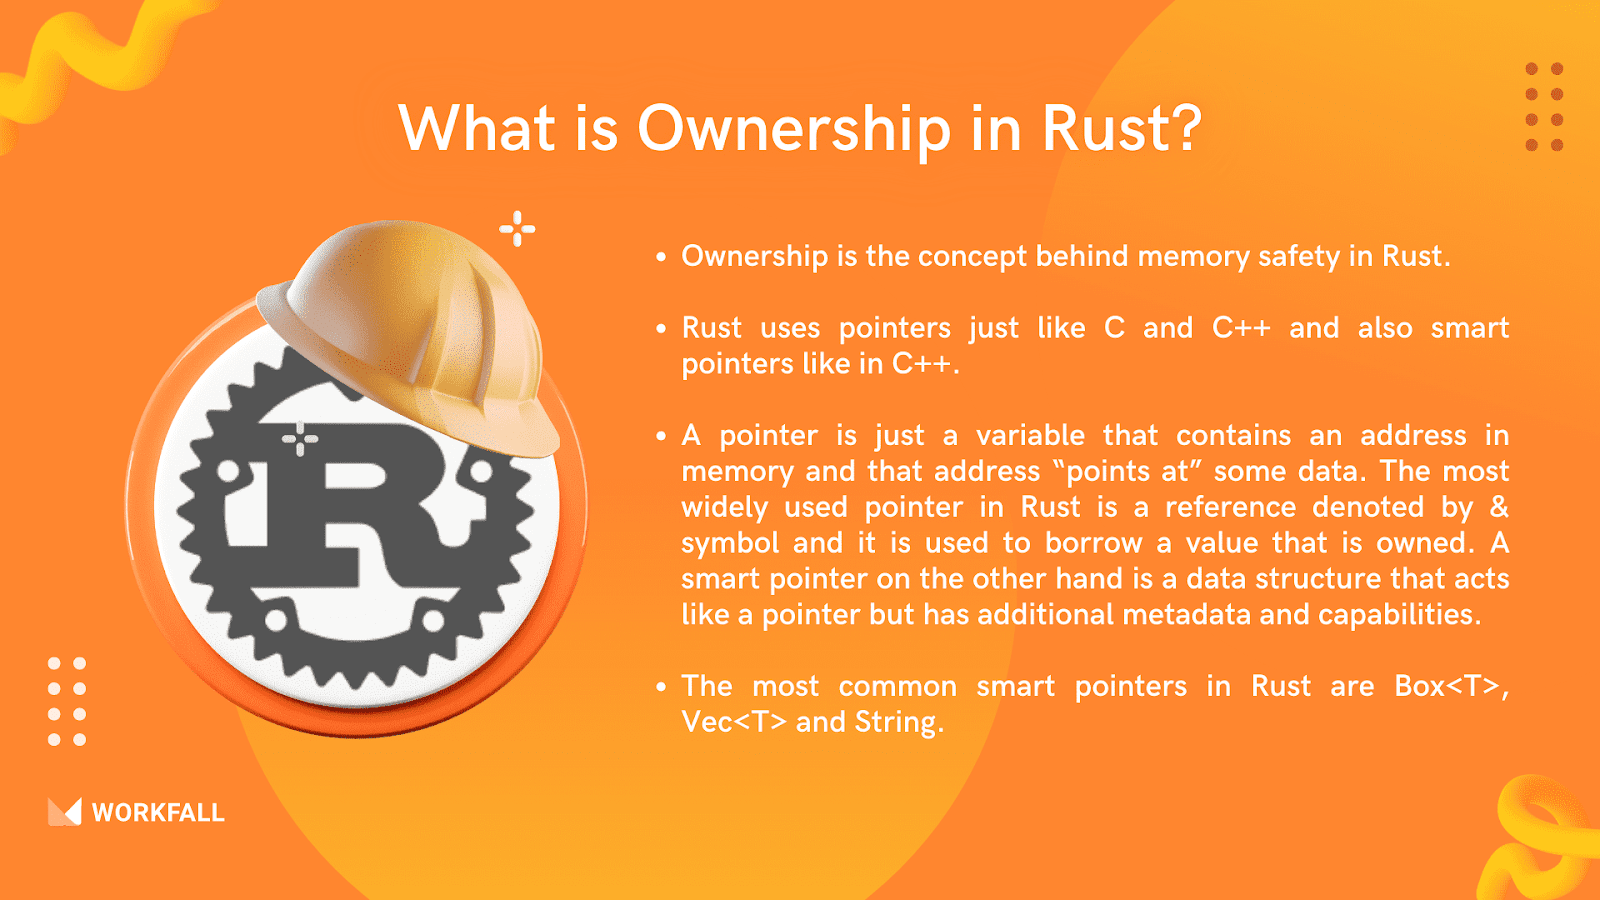 What is Ownership in Rust?